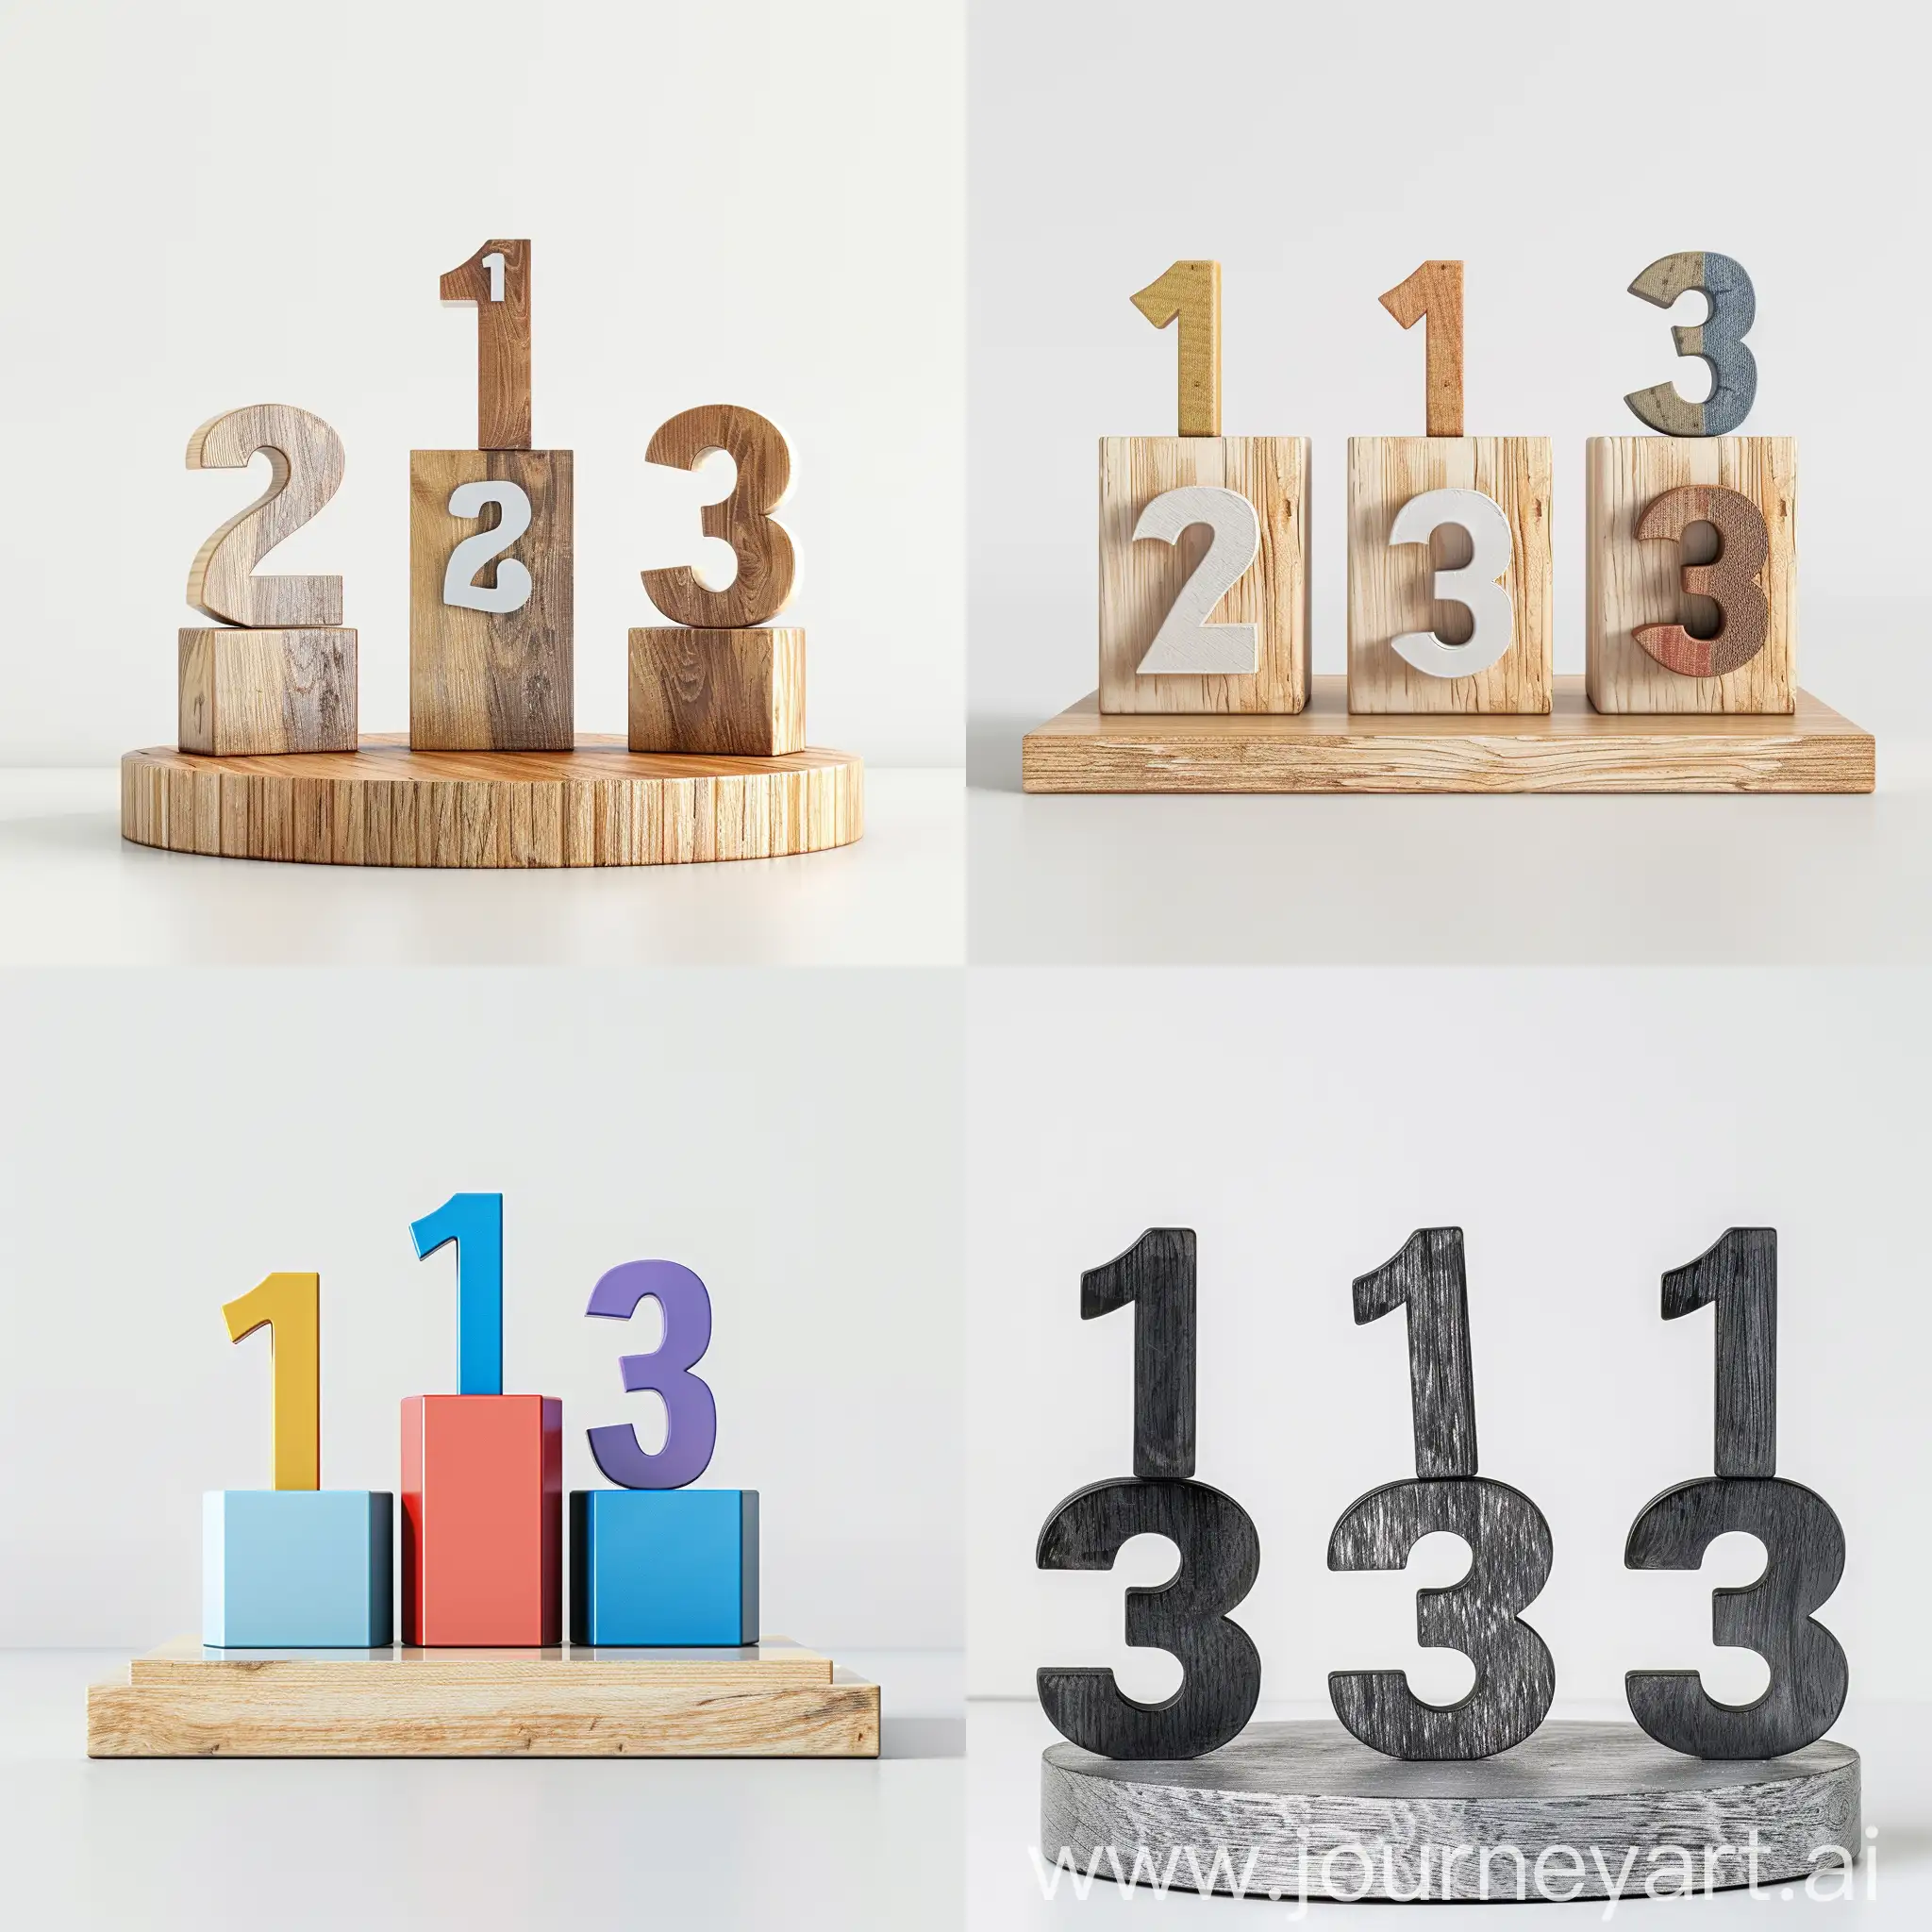 generate an image of podium with numbers 1,2 and 3 in front of a white background.